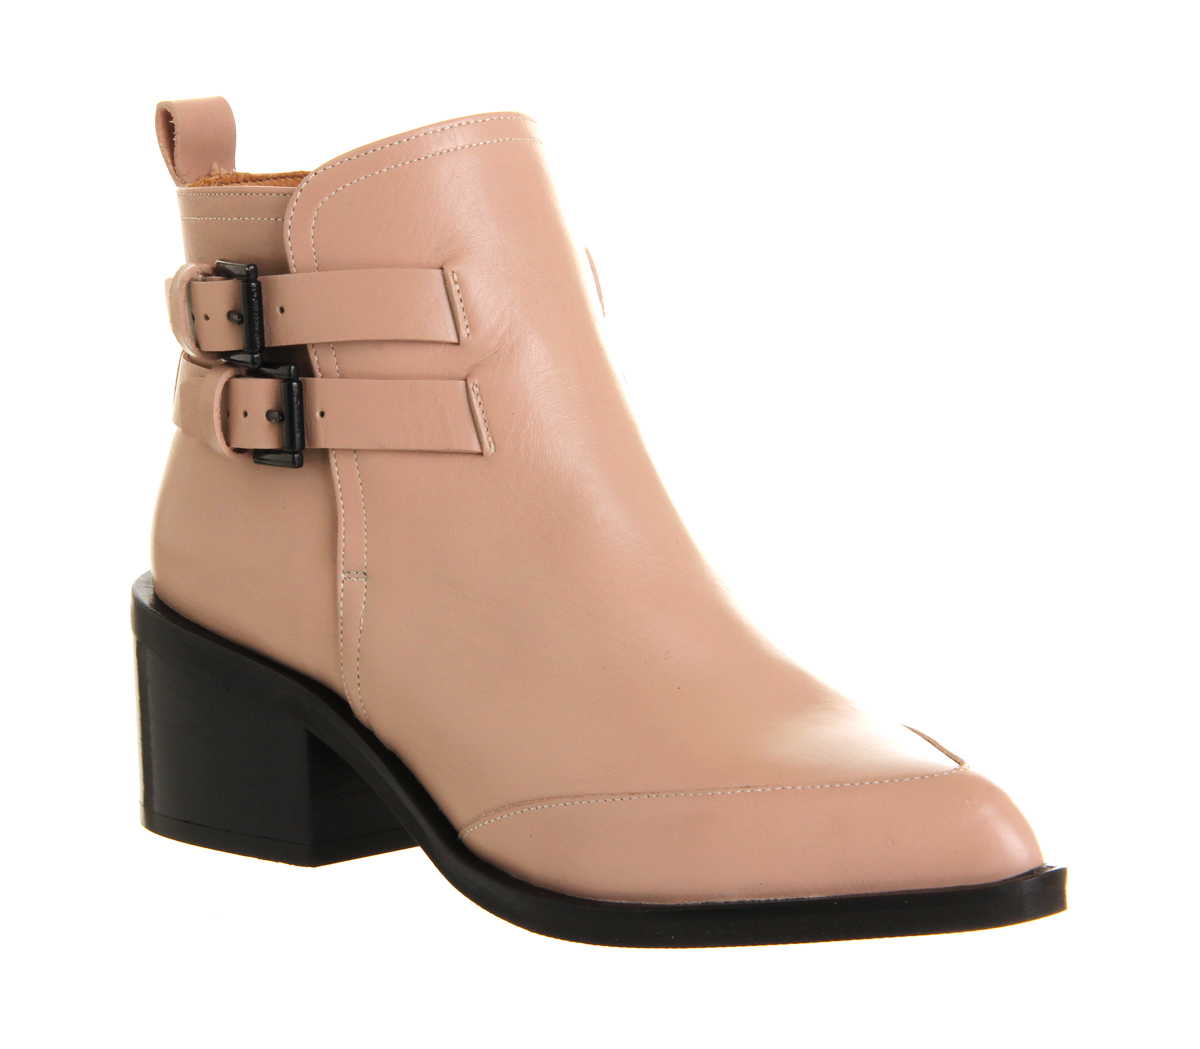 OFFICEMarvel Double Buckle bootsPink Leather